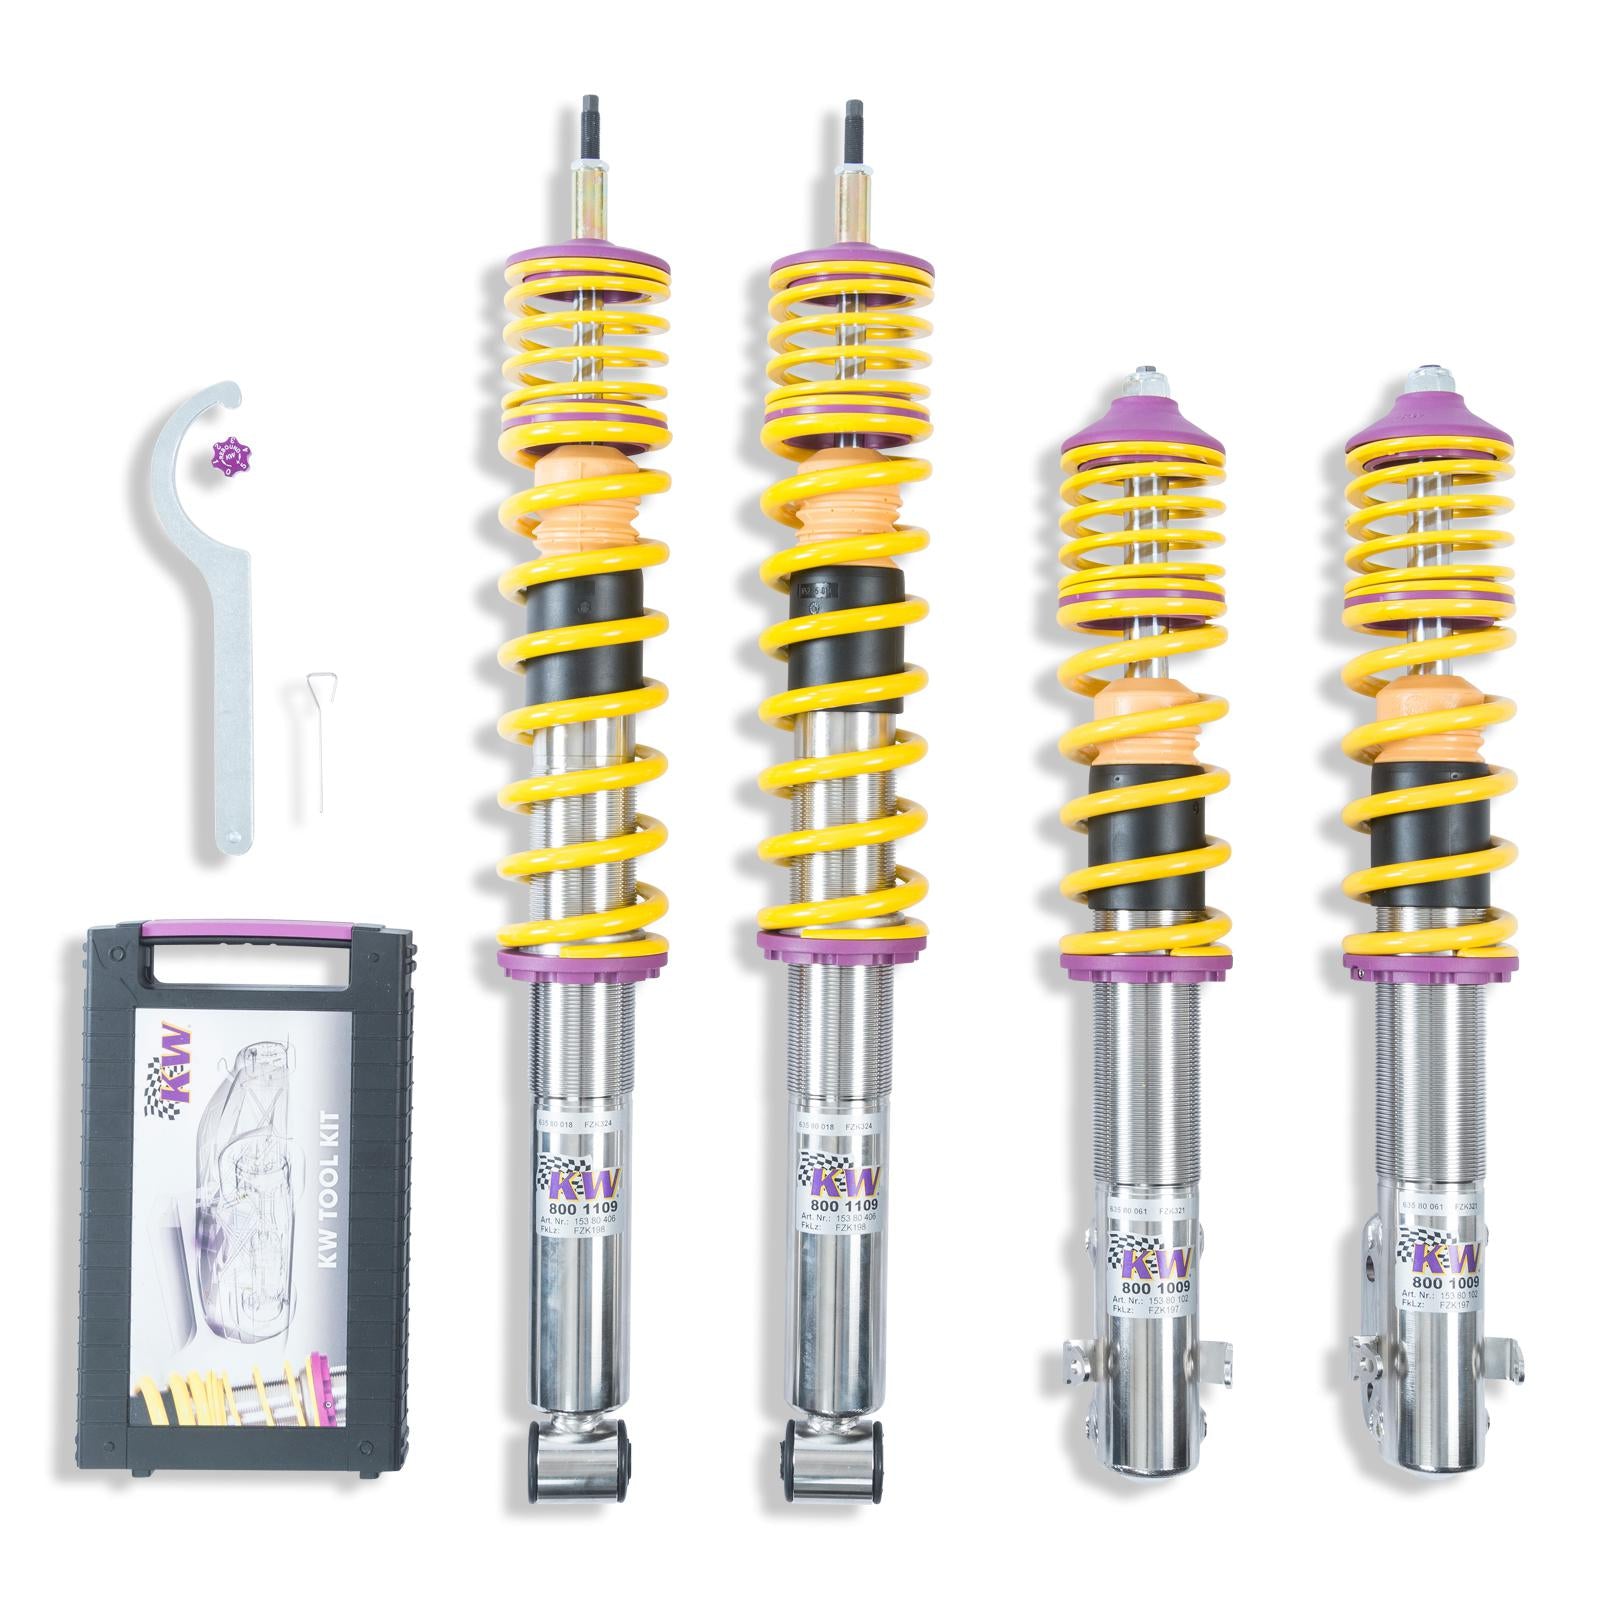 KW Audi 8P A3 Variant 2 Coilover kit - Inc. Deactivation For Electronic Damper | ML Performance UK 